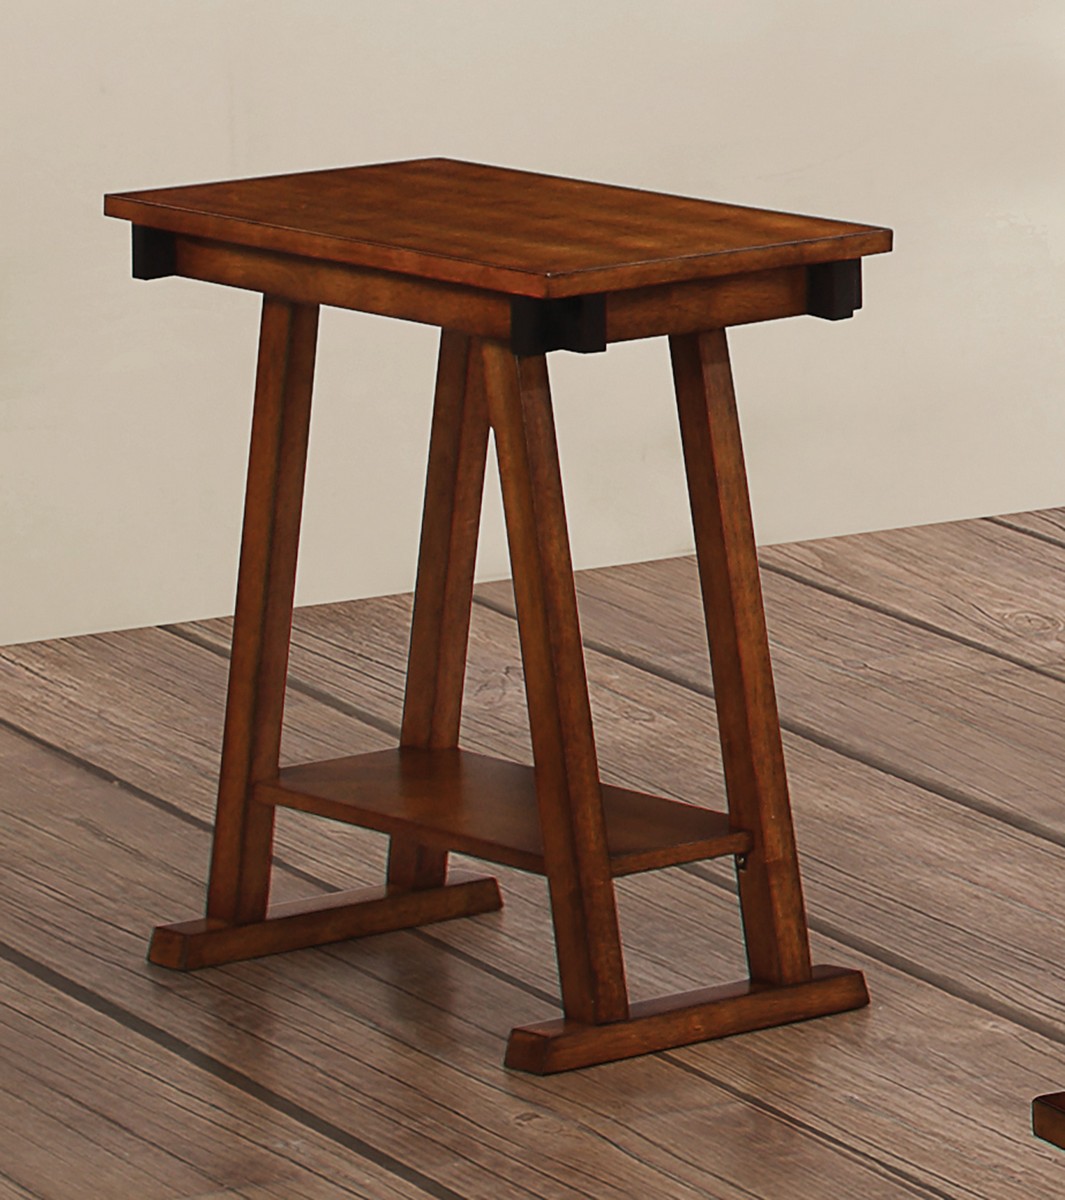 Coaster 900625 Accent Table - Warm Brown